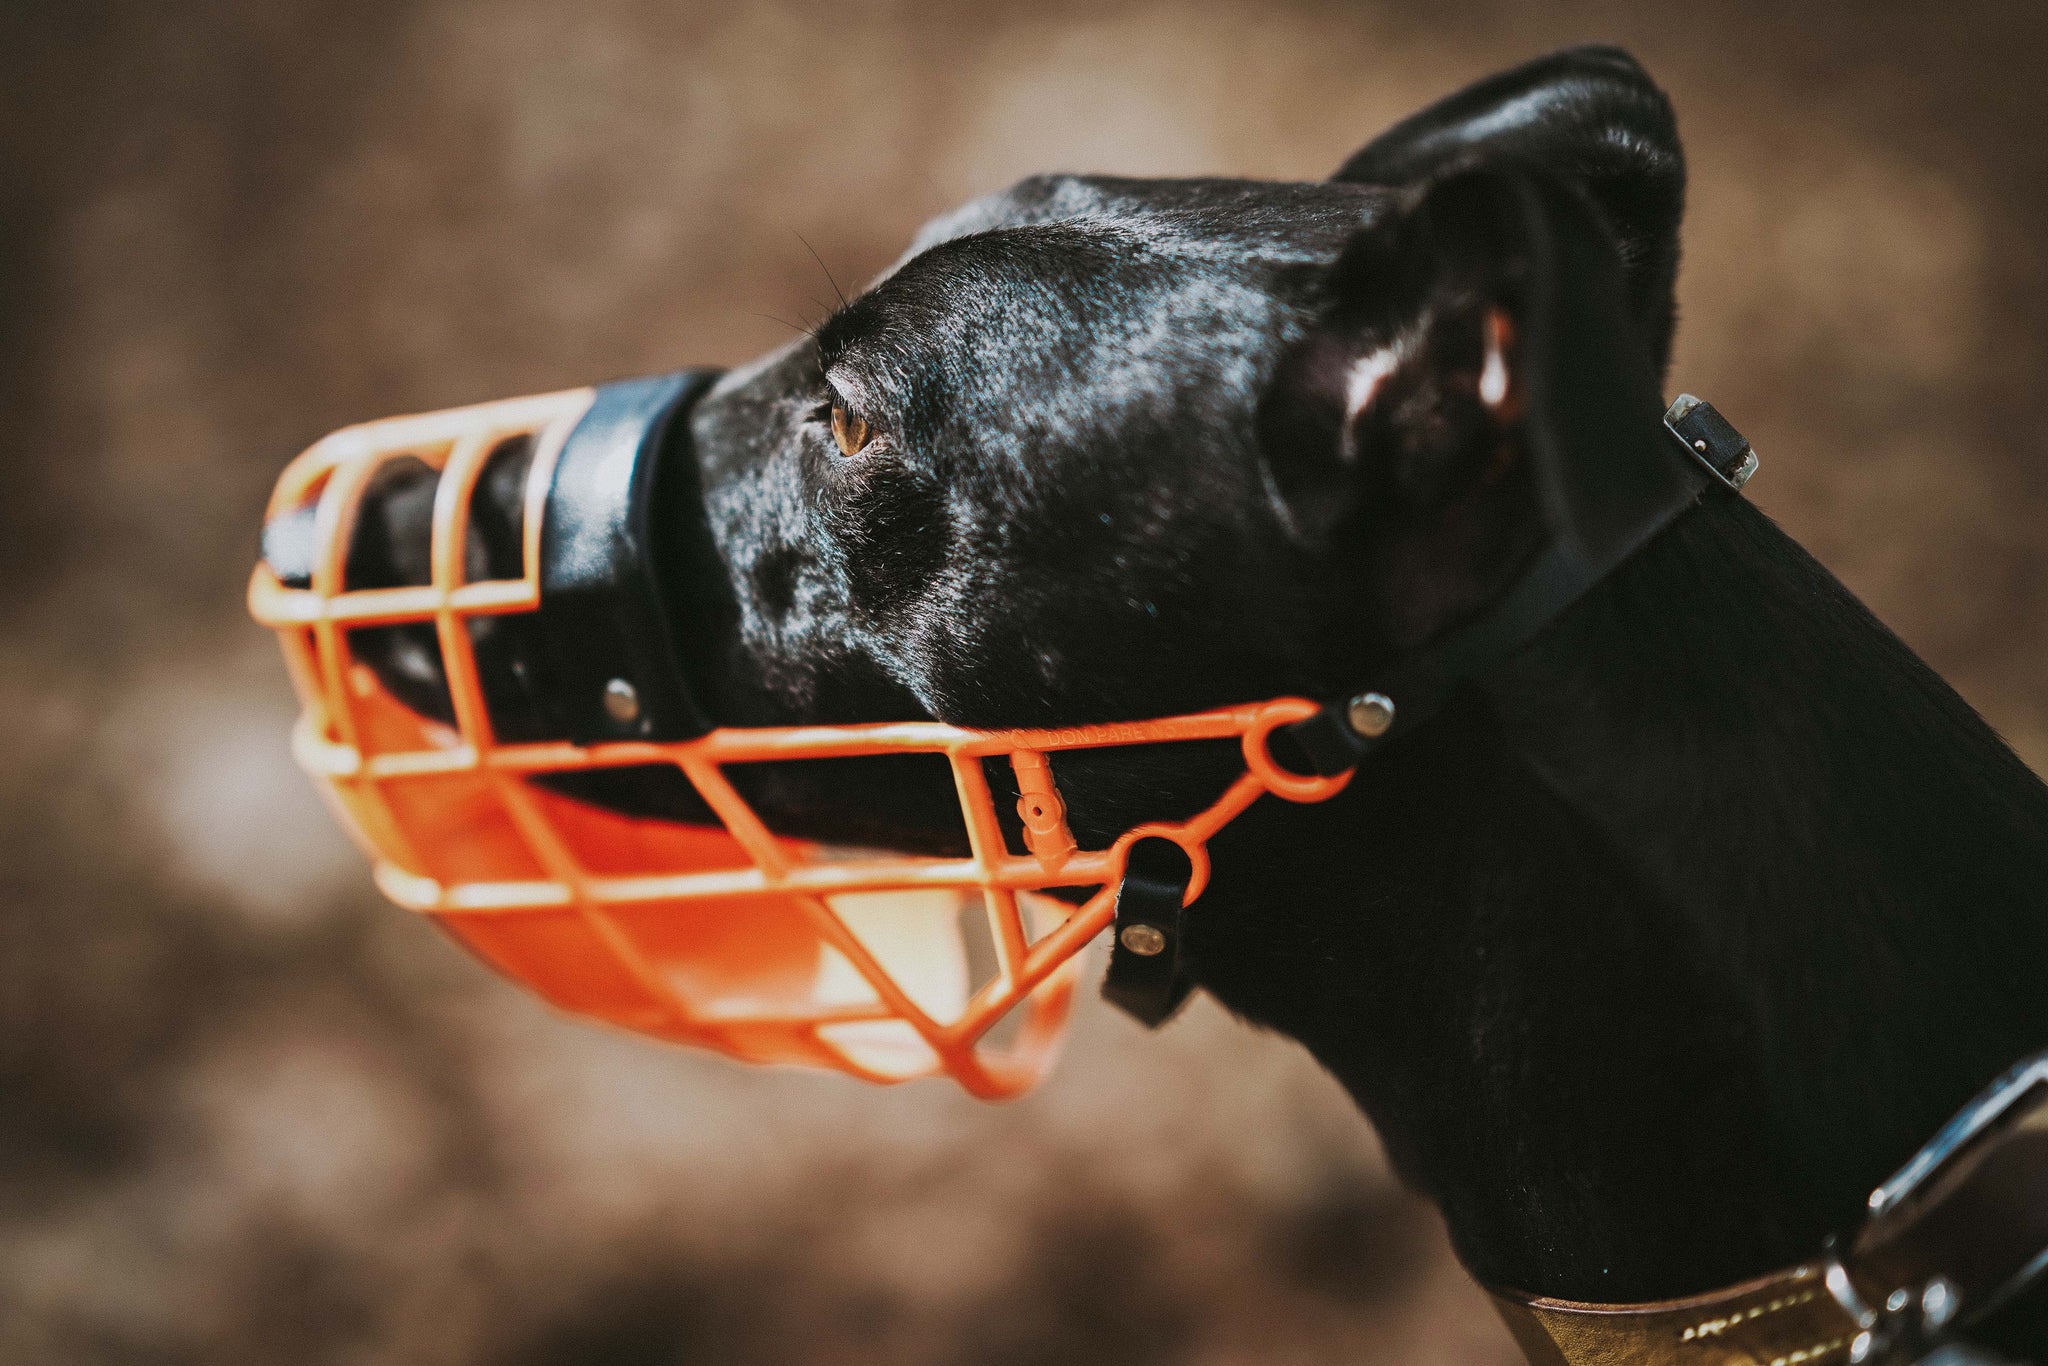 This photo shows a dog with a muzzle. It is part of the blog post 'A Plea for the Muzzle'. The collar and leash are from PAWSOME dog accessories. Photo by <a href="https://unsplash.com/@anniespratt?utm_source=unsplash&amp;utm_medium=referral&amp;utm_content=creditCopyText">Annie Spratt</a> on <a href="https://unsplash.com /s/photos/muzzle?utm_source=unsplash&amp;utm_medium=referral&amp;utm_content=creditCopyText">Unsplash</a>